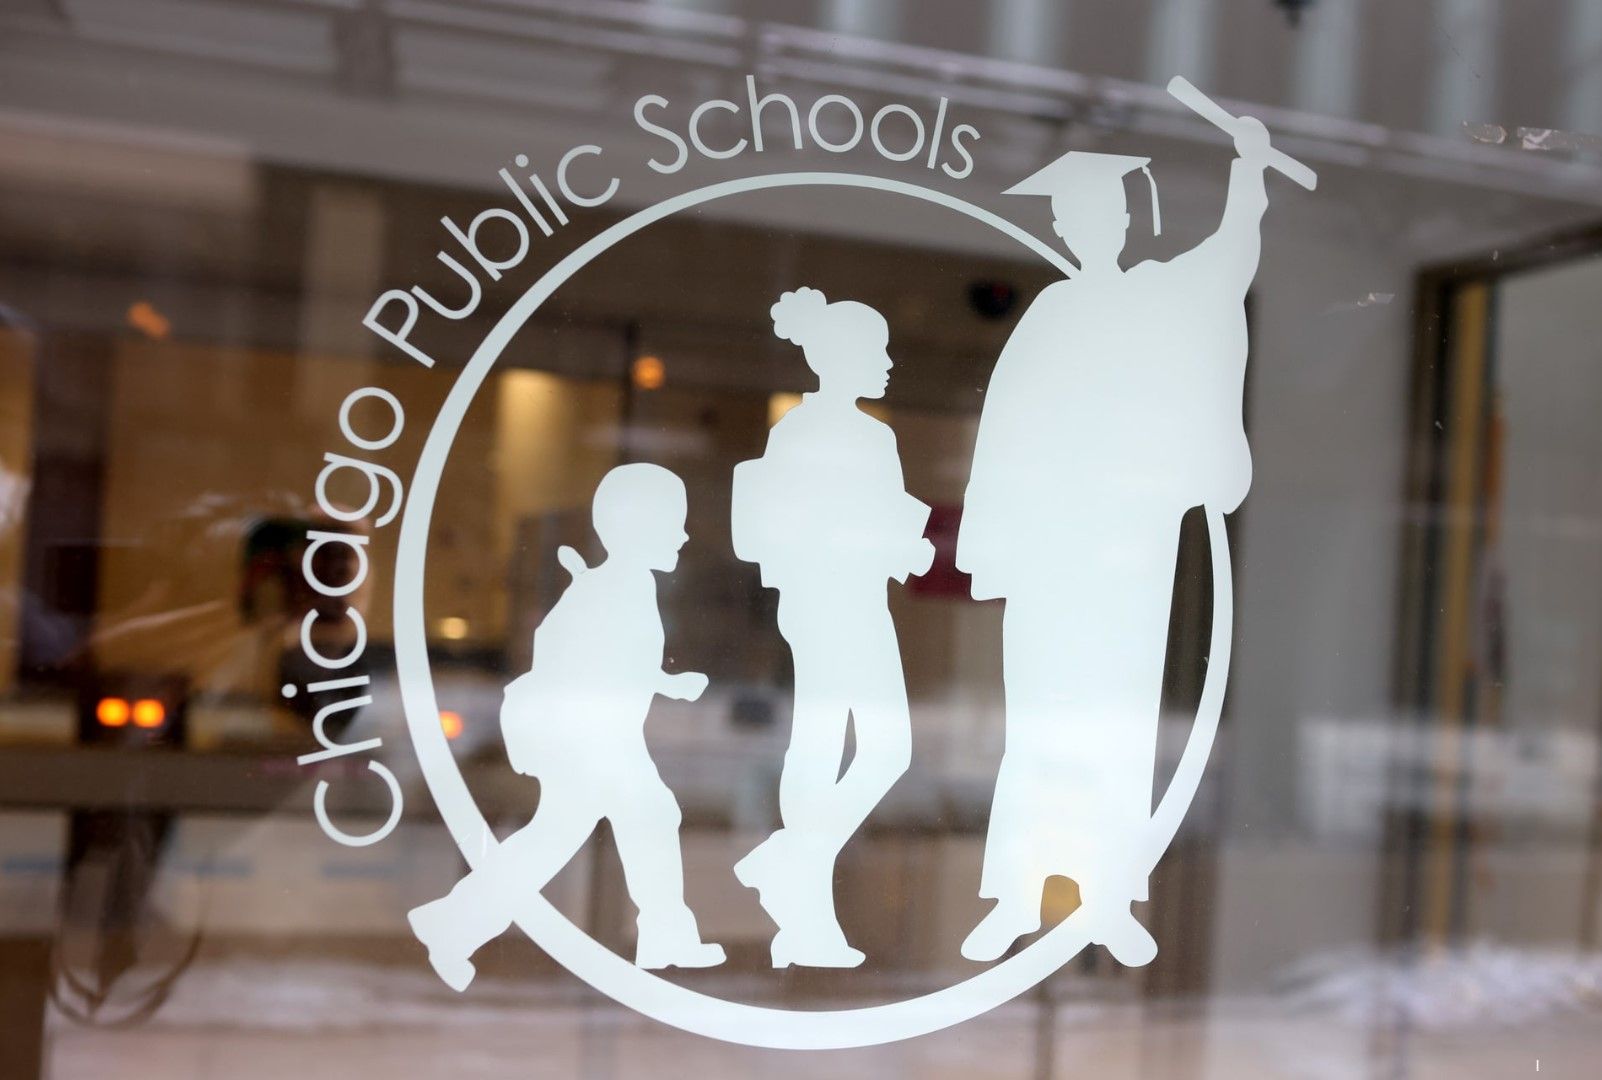 CPS to drop mask requirement in classrooms